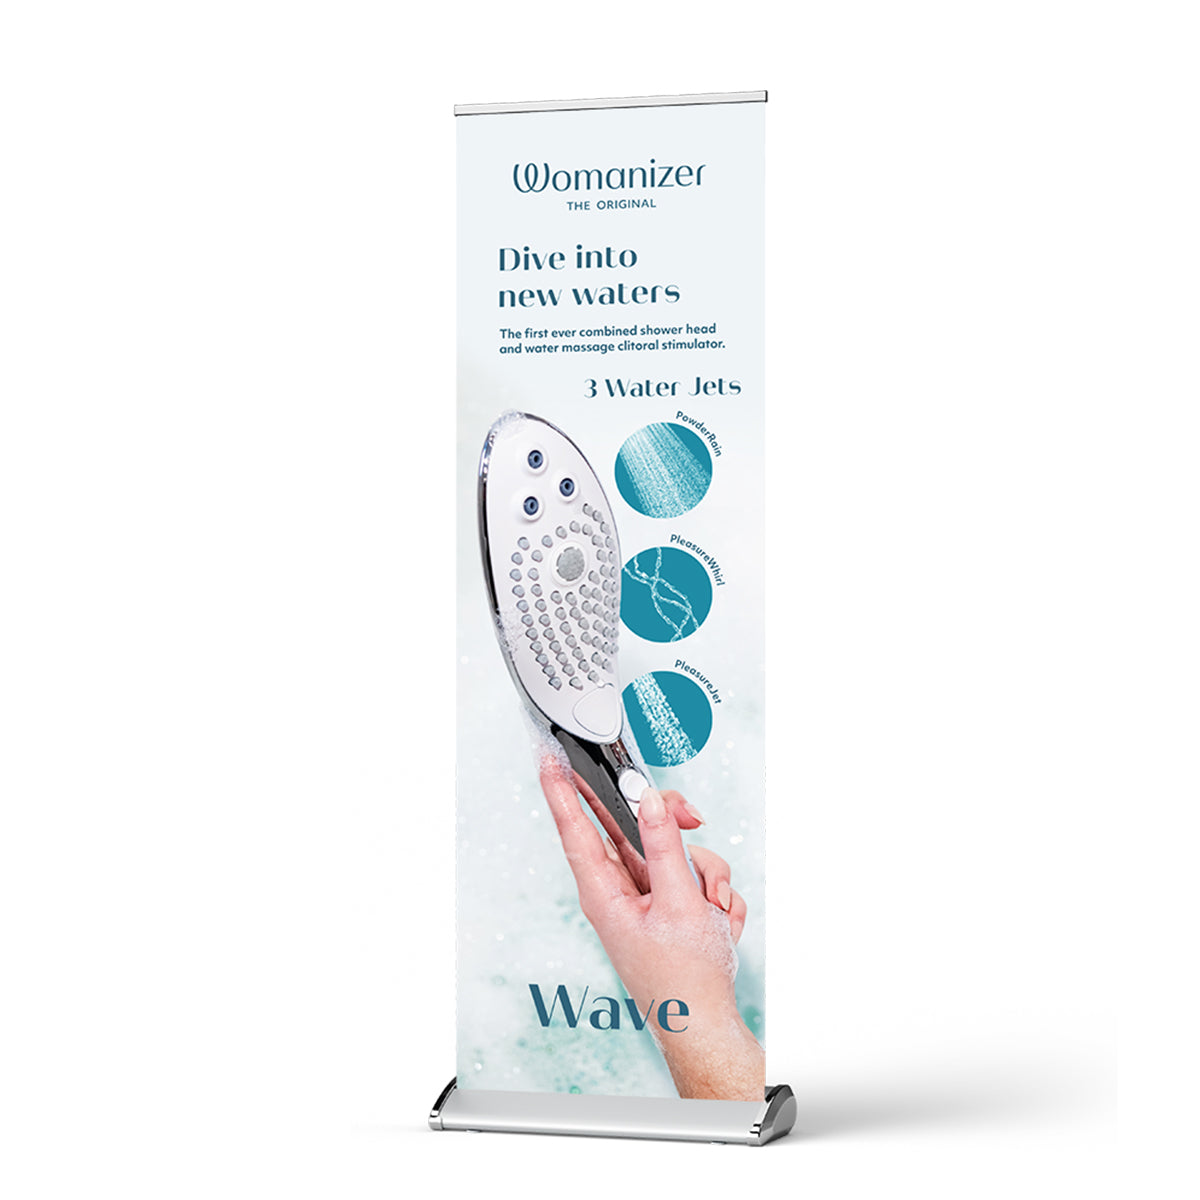 Womanizer Roll-up Banners